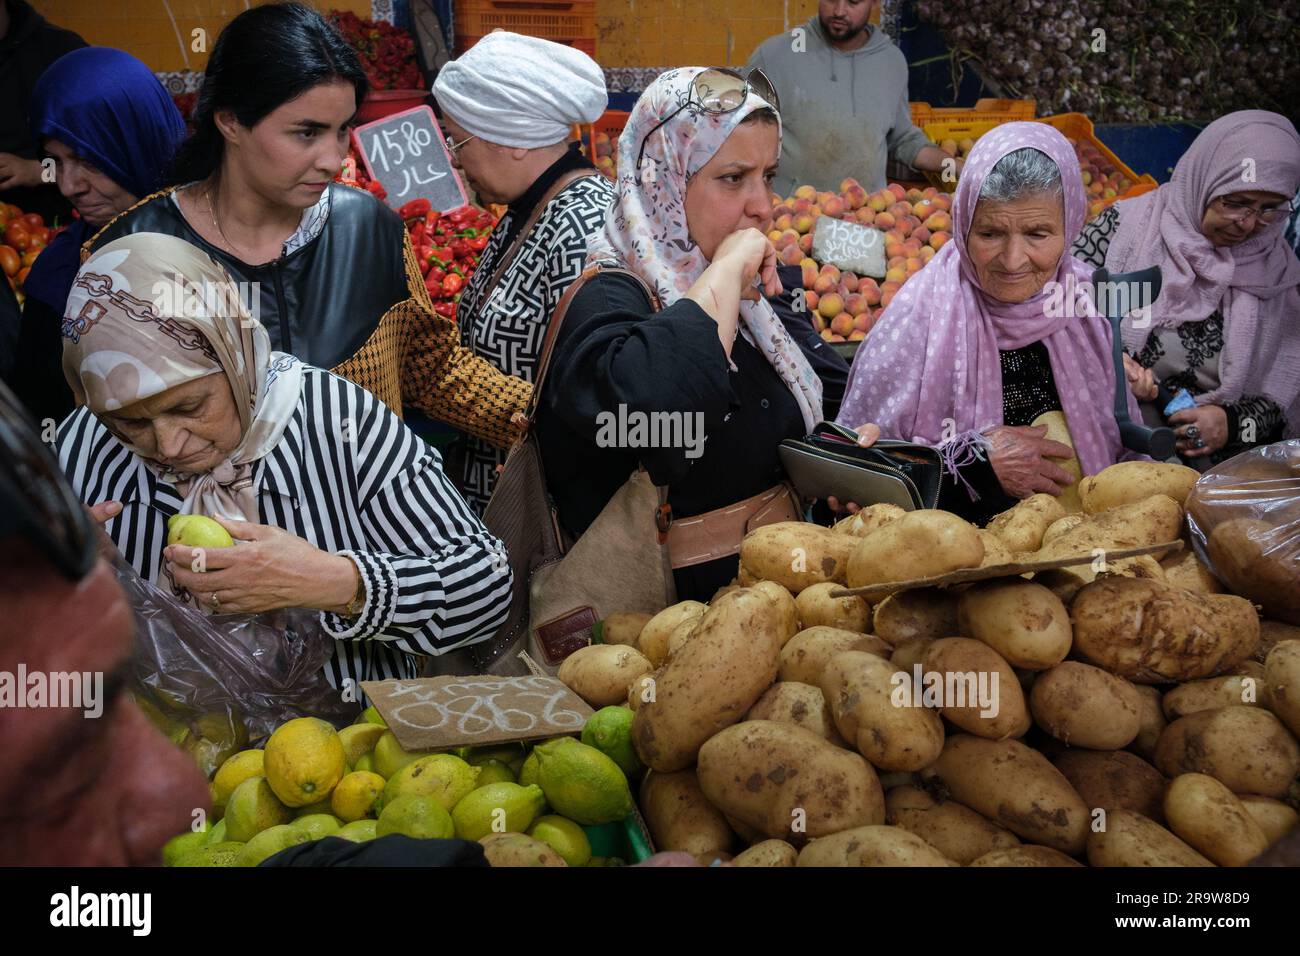 Women in the streets of Sousse, Tunisia Stock Photo